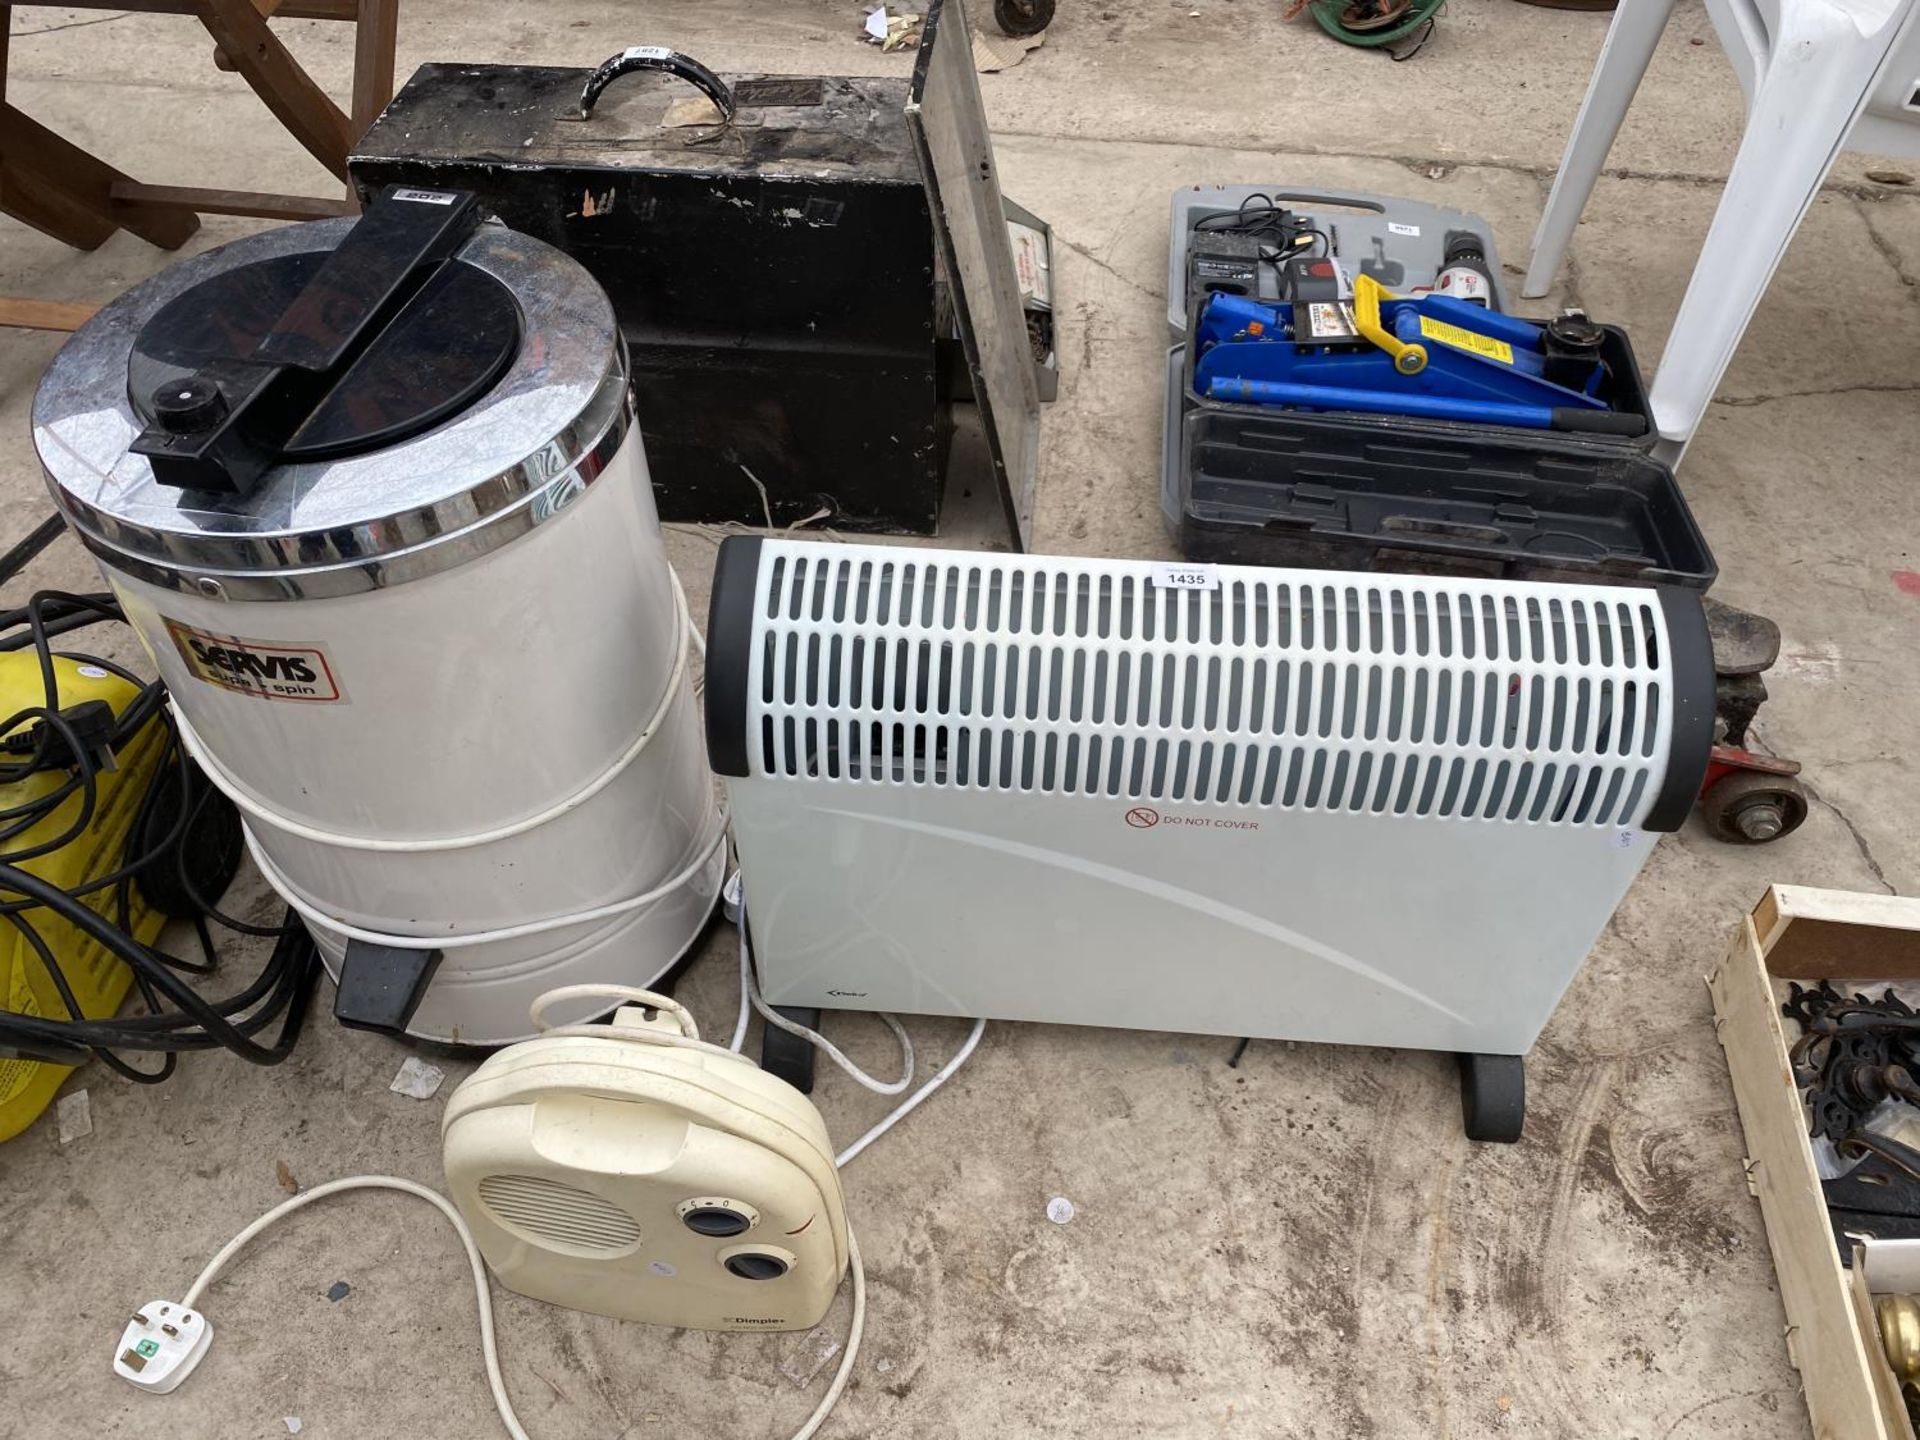 TWO ELECTRIC HEATERS, A SPIN DRYER A PRESSURE WASHER AND AN ALADDIN HEATER - Image 2 of 4